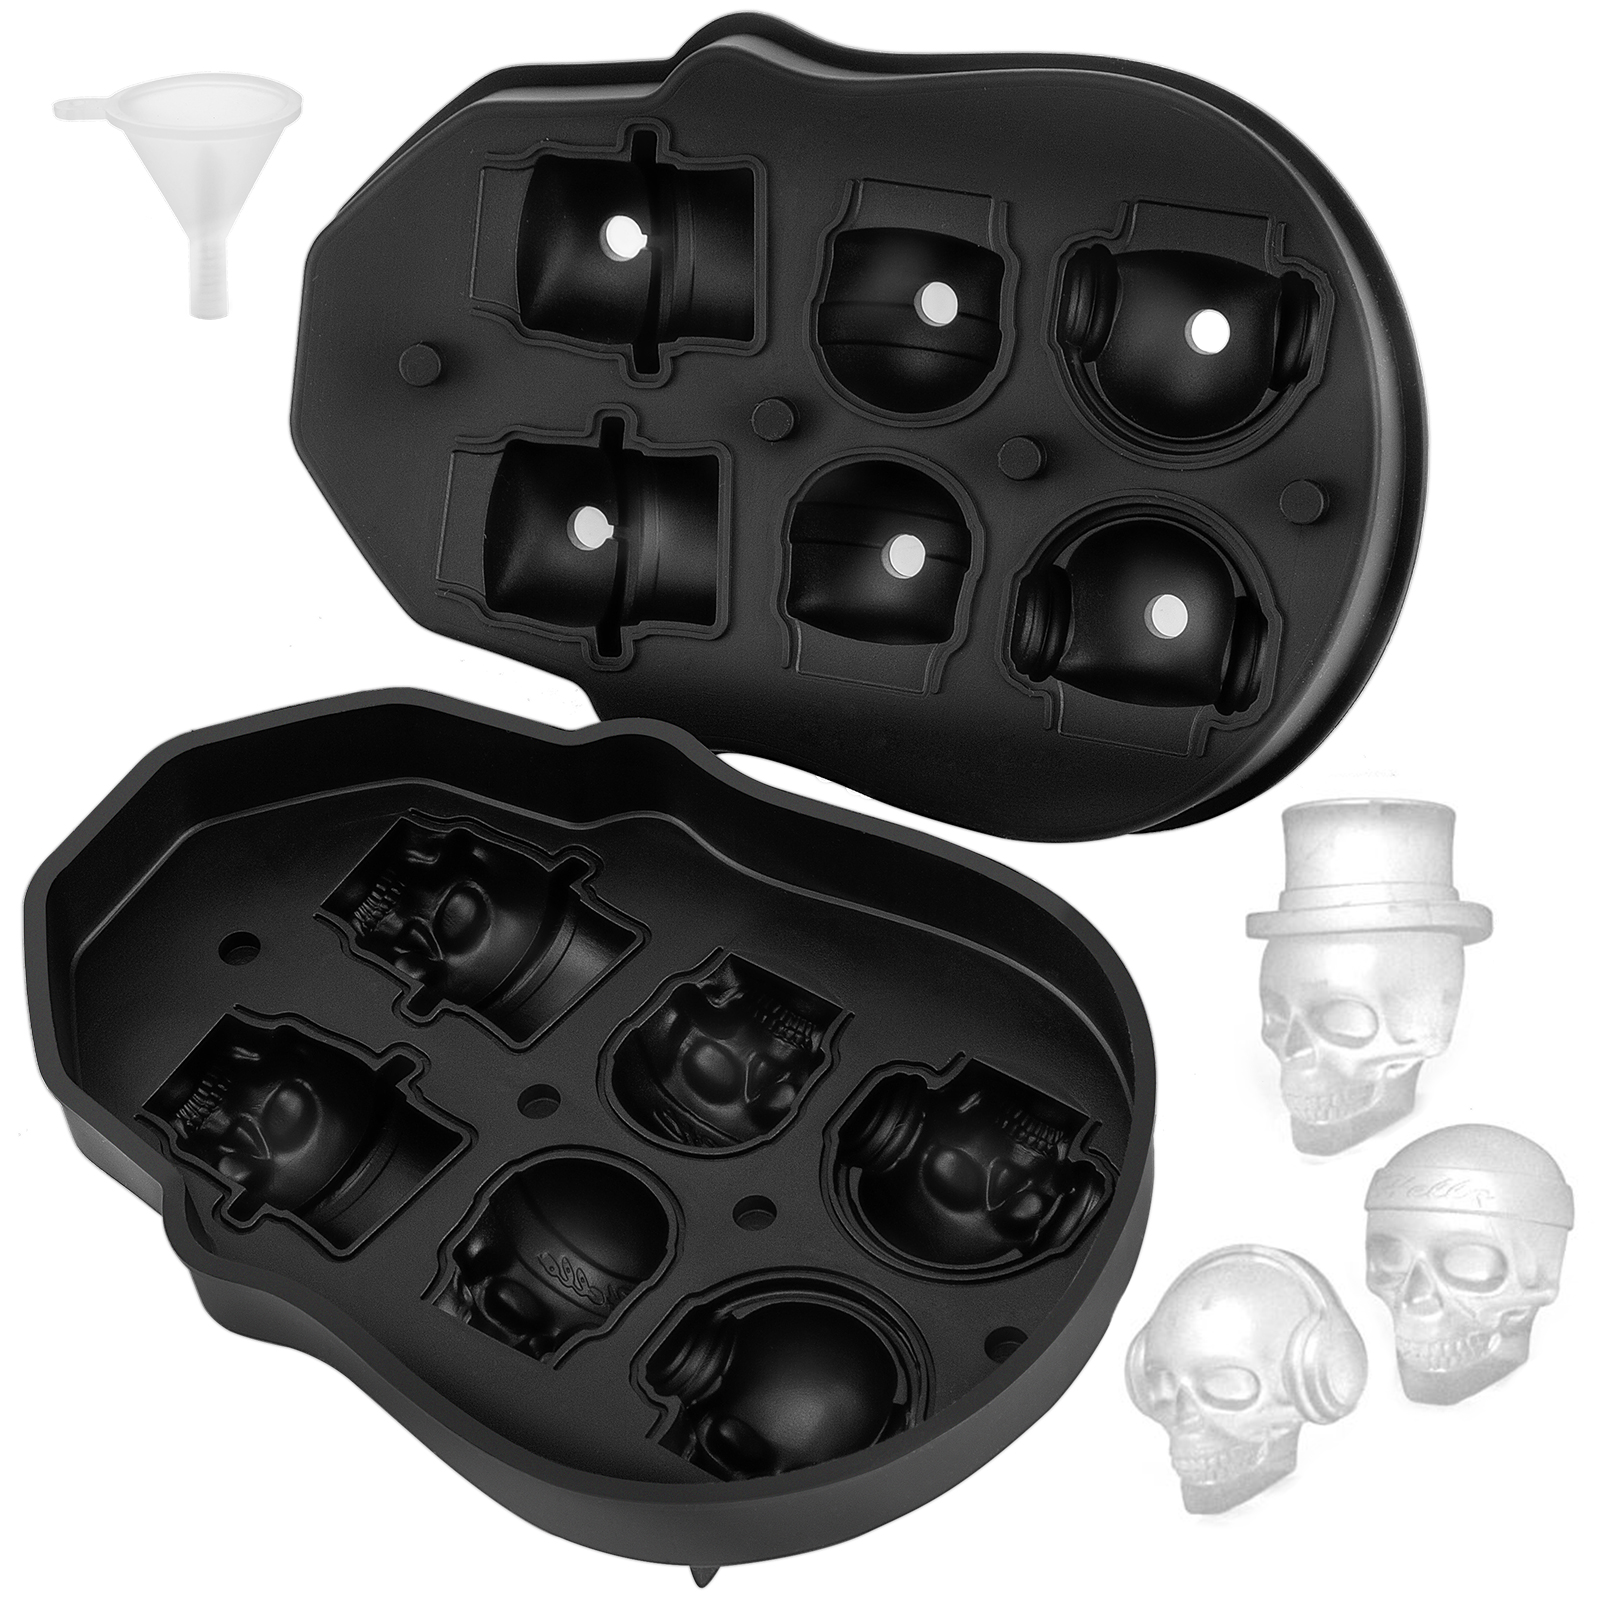 Party Set of 3 Fangs Skeleton Bones Pumpkins Halloween Flexible Silicone Ice Cube Mold Trays 